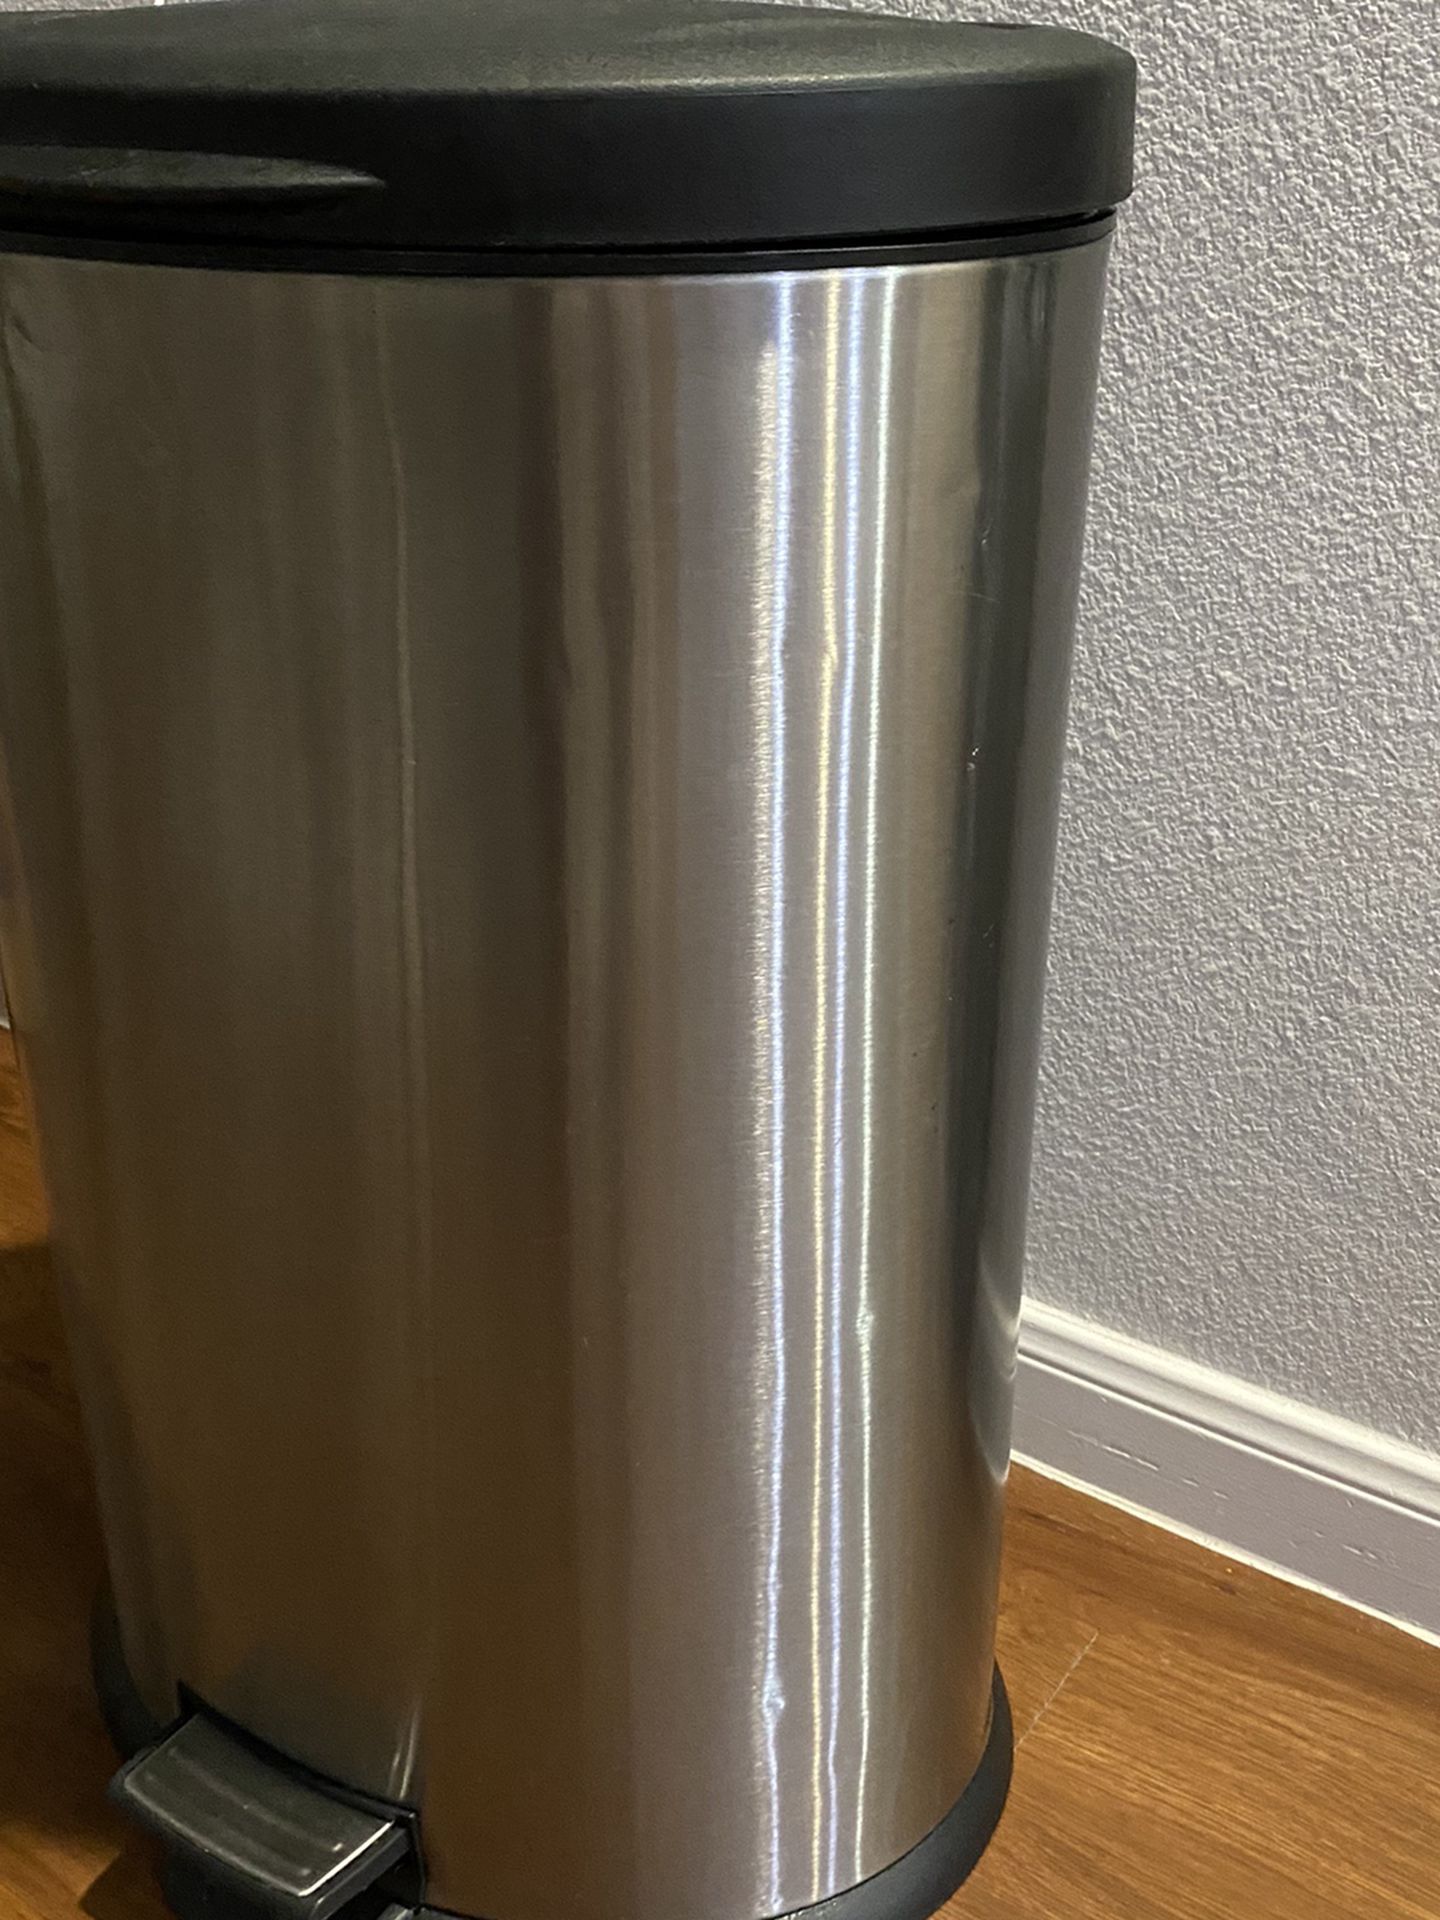 Black Top Stainless steel Trash Can